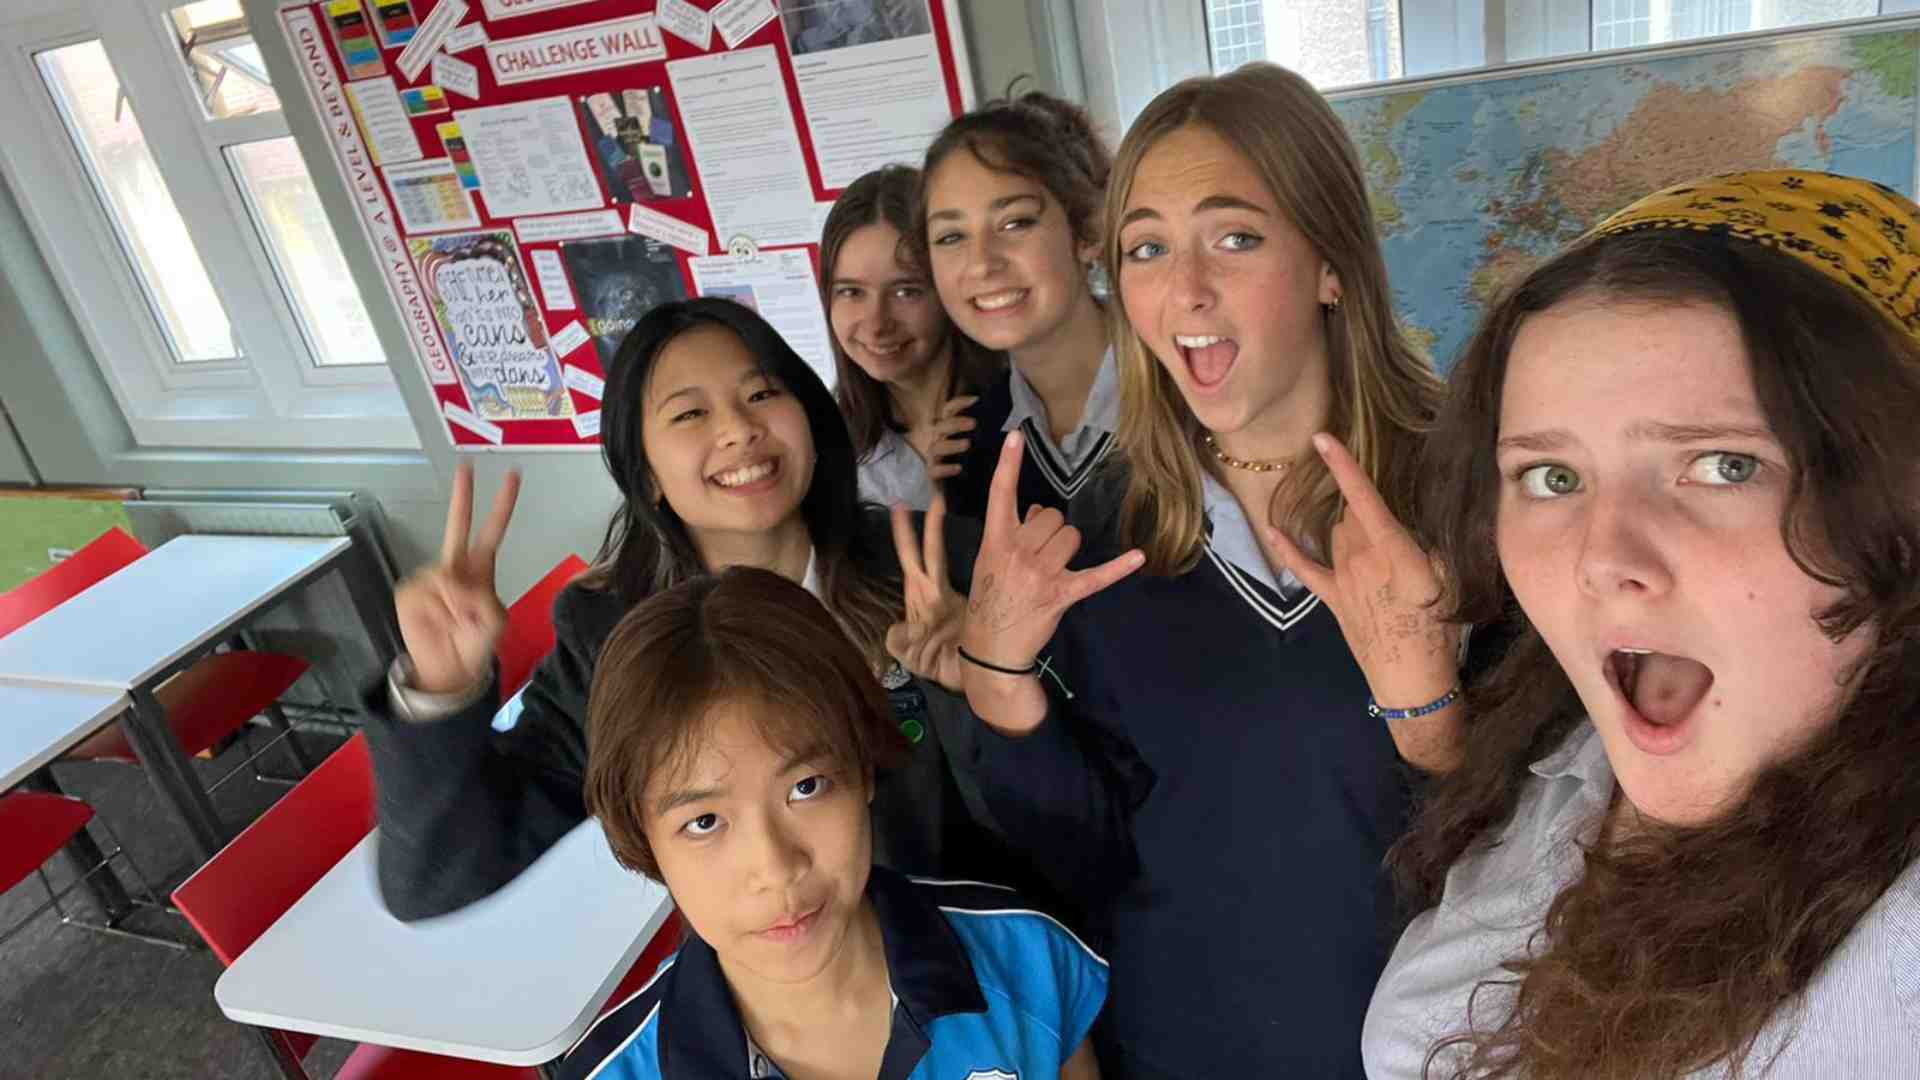 pivot academics international school and boarding school admission consultancy tutoring intensive course background image former student audrey so shatin college hong kong